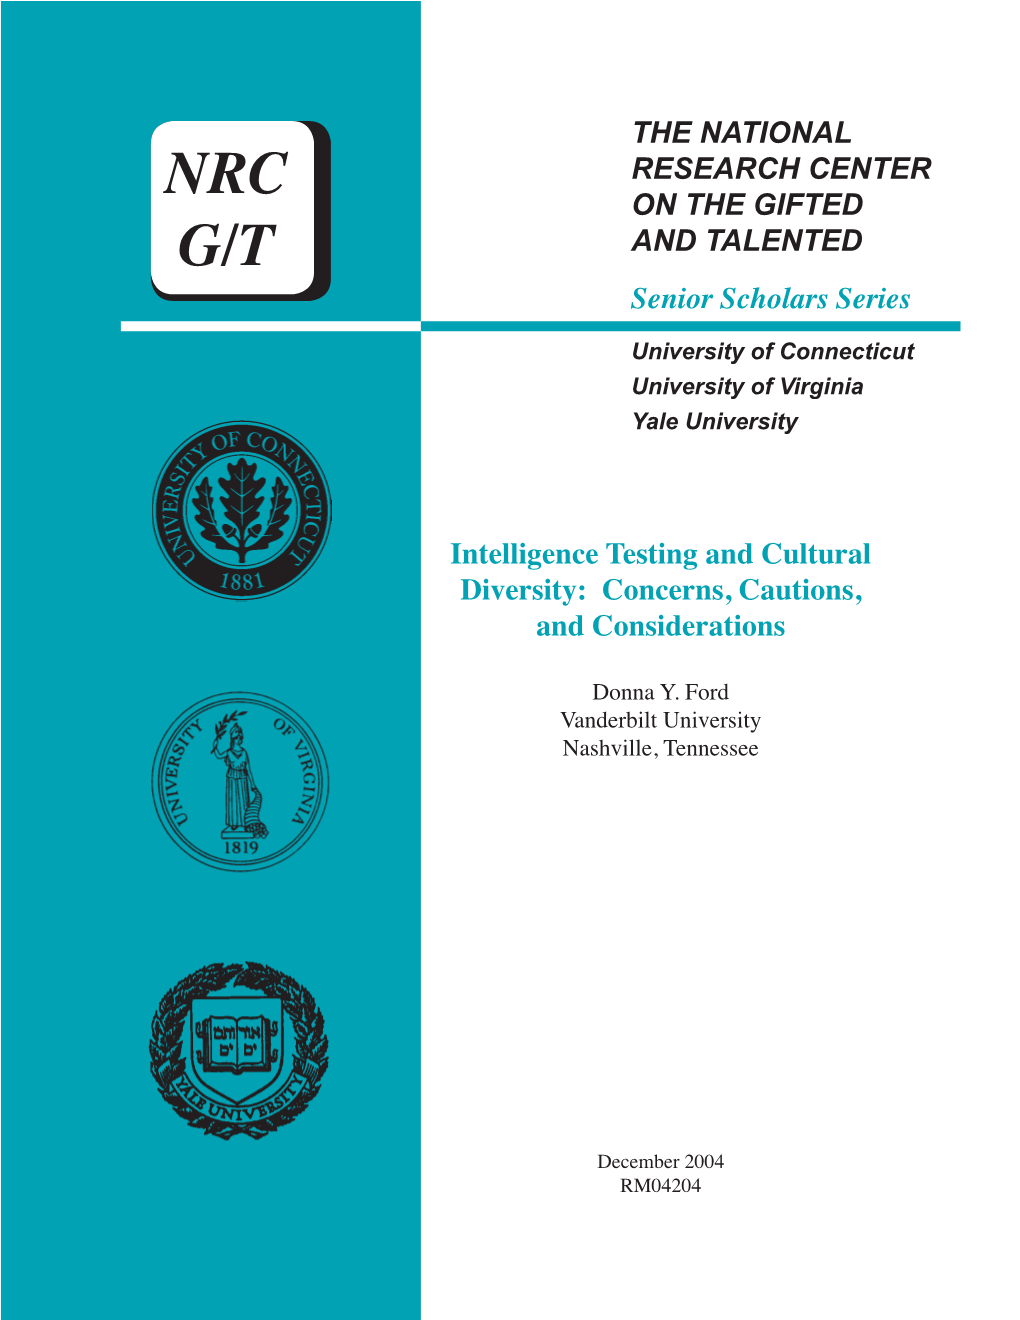 Intelligence Testing and Cultural Diversity: Concerns, Cautions, and Considerations